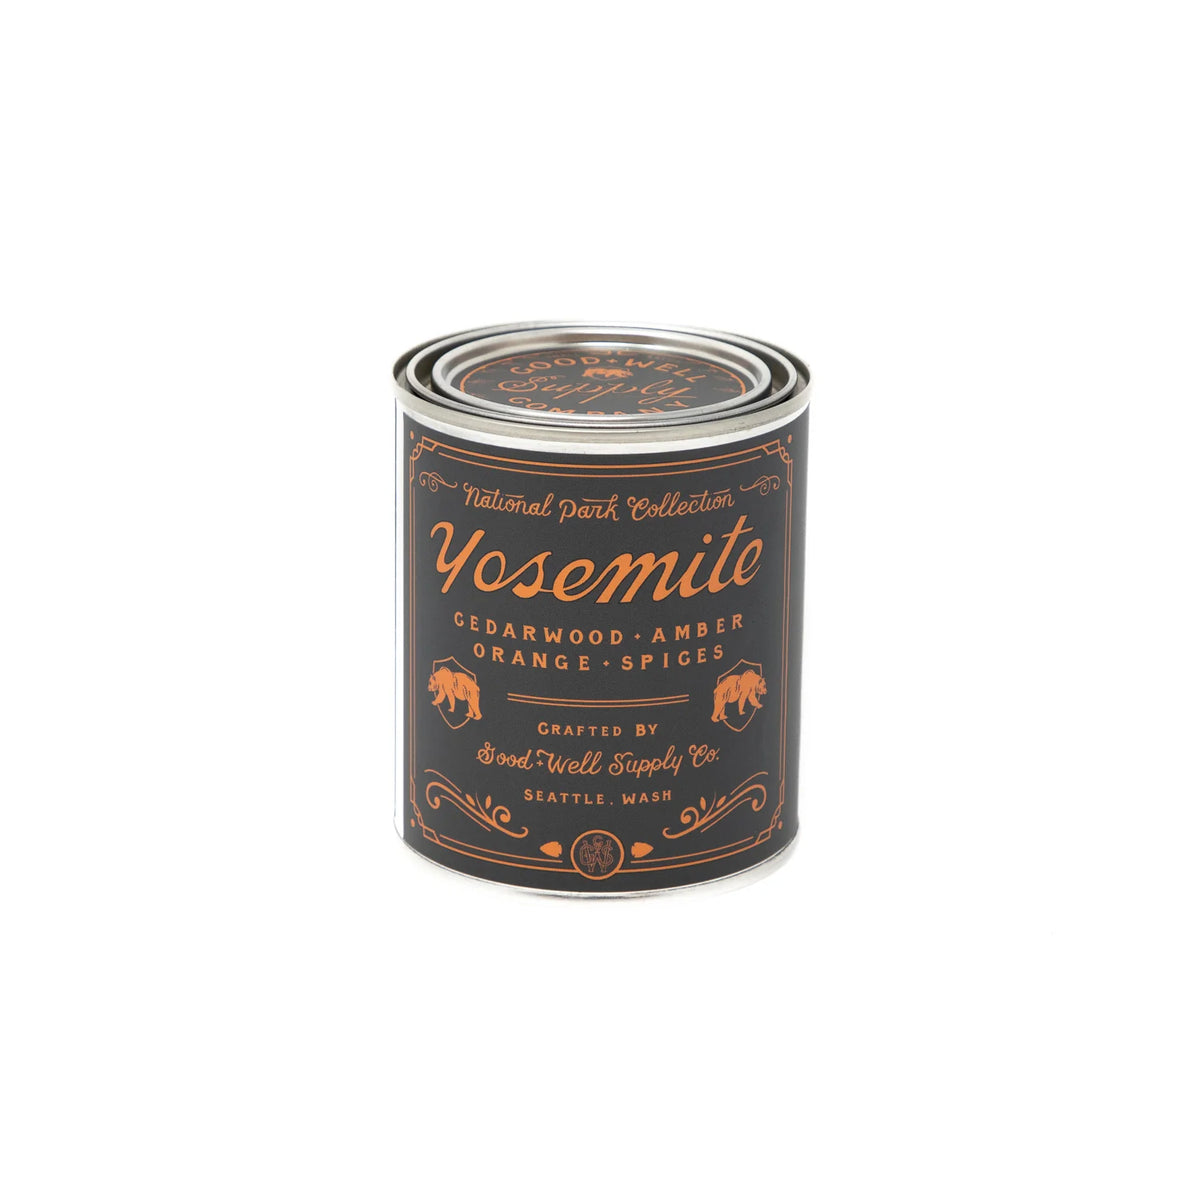 Good & Well Supply Co Yosemite National Park Candle 8oz